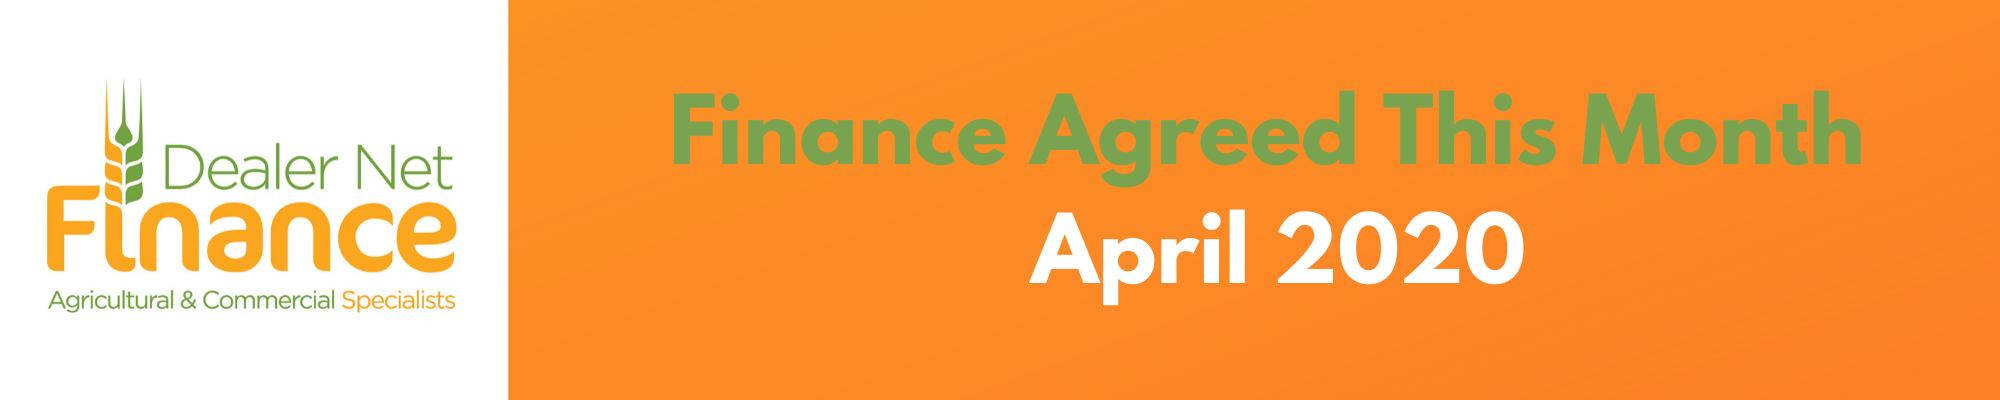 Finance Agreed This Month – April 2020